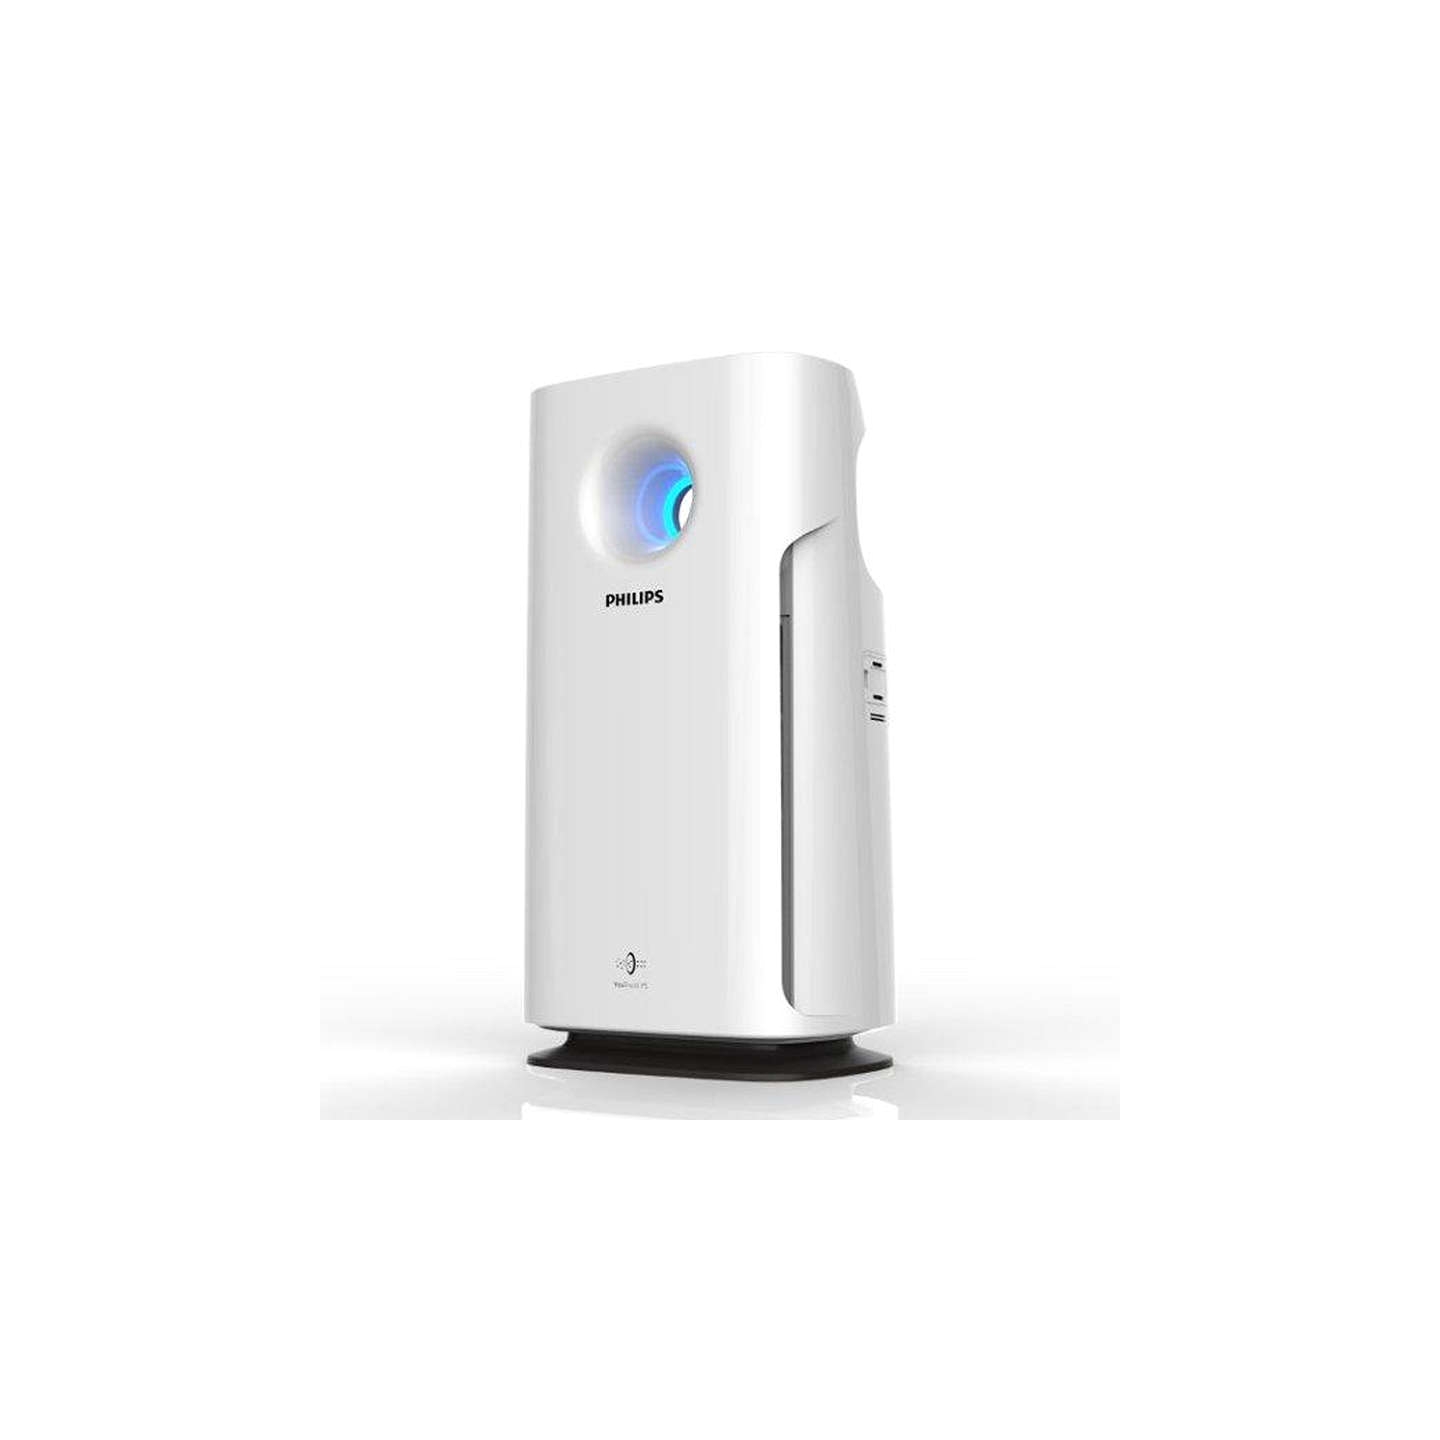 buyphilips ac3256 60 anti allergen and nanoprotect filter air purifier online at johnlewis